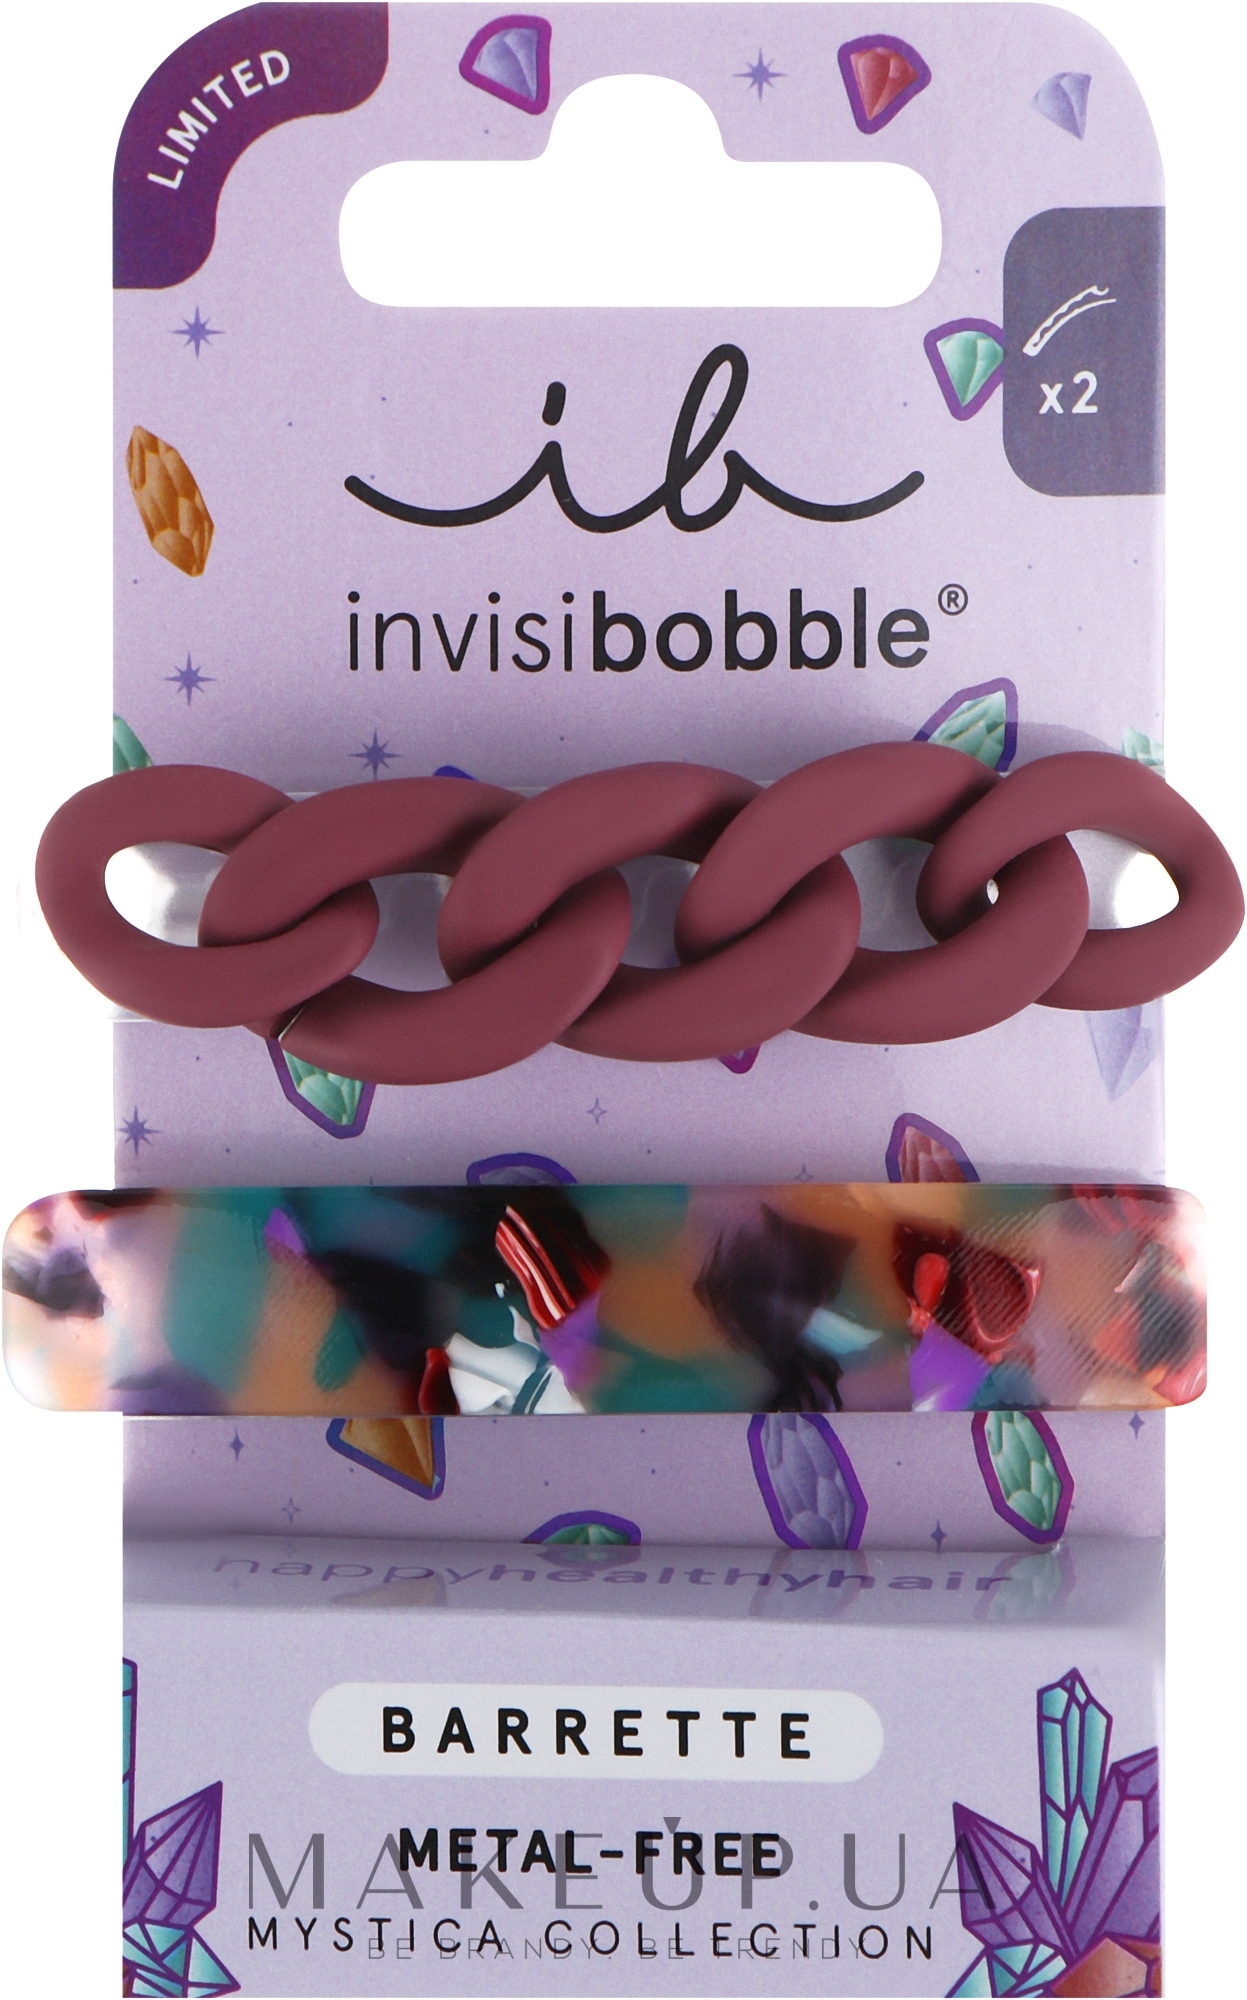 Заколка для волос - Invisibobble Barrette Mystica The Rest Is Mystery — фото 2шт